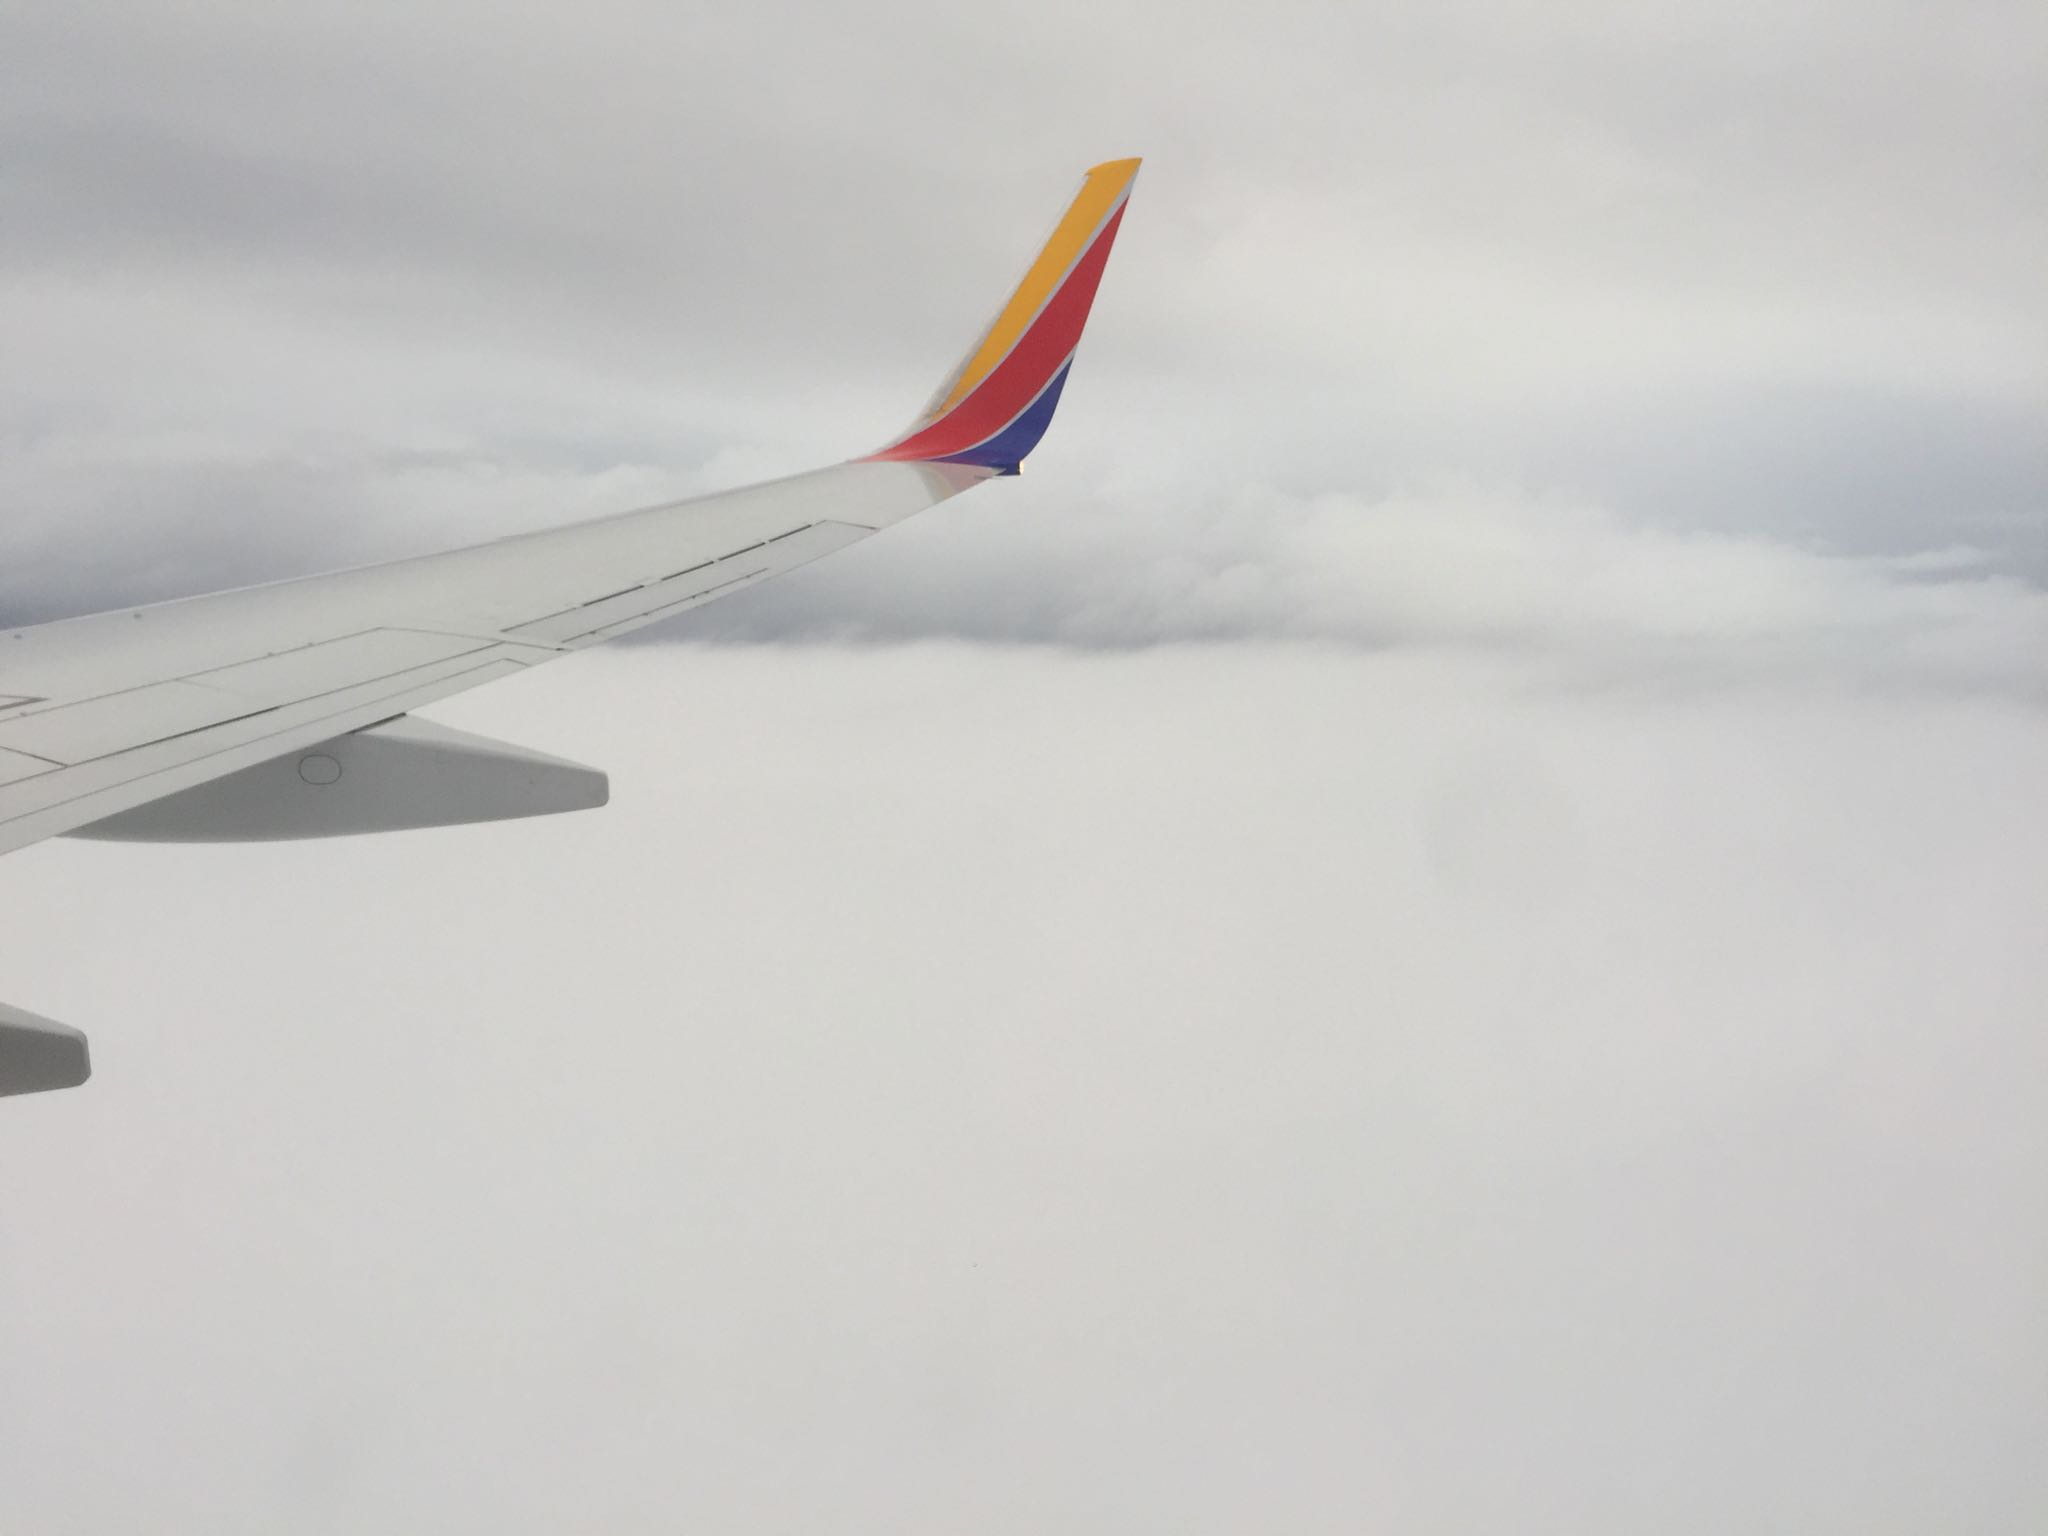 Flying back to LGA after CES with the wing tip in the clouds